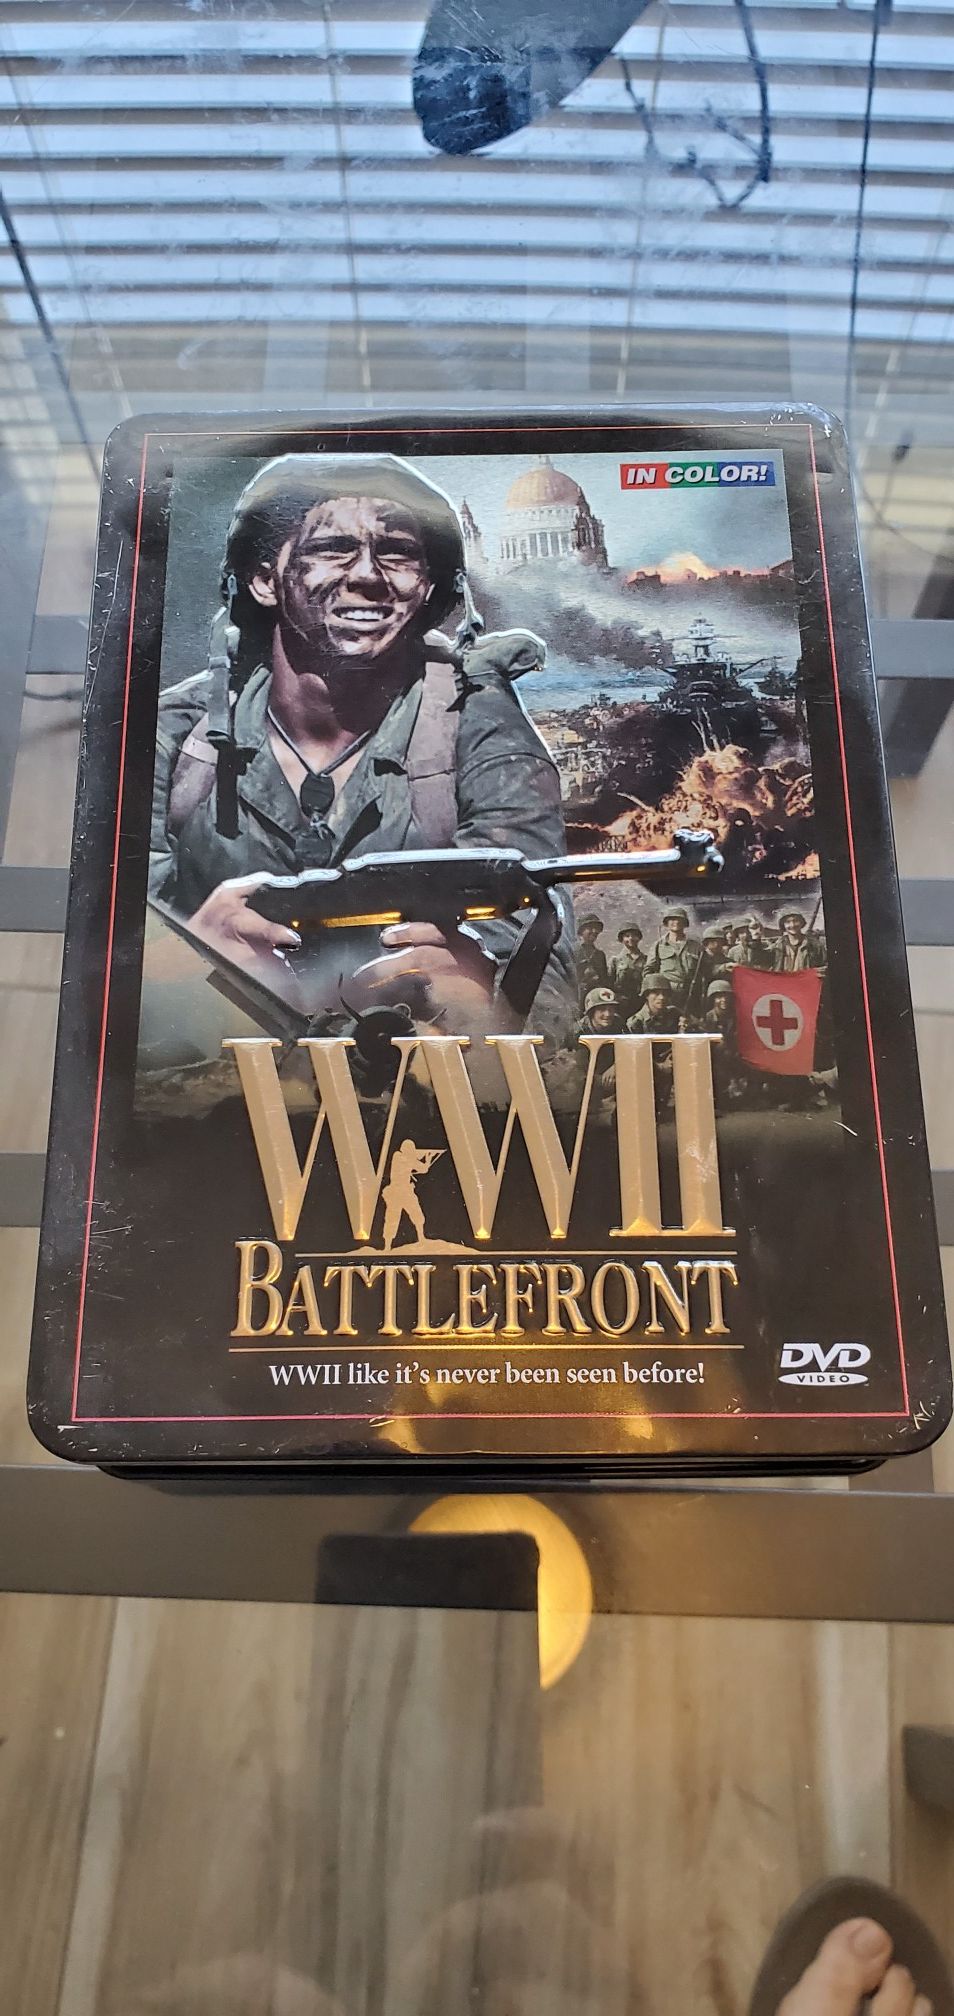 WWII Battlefront DVD in color.